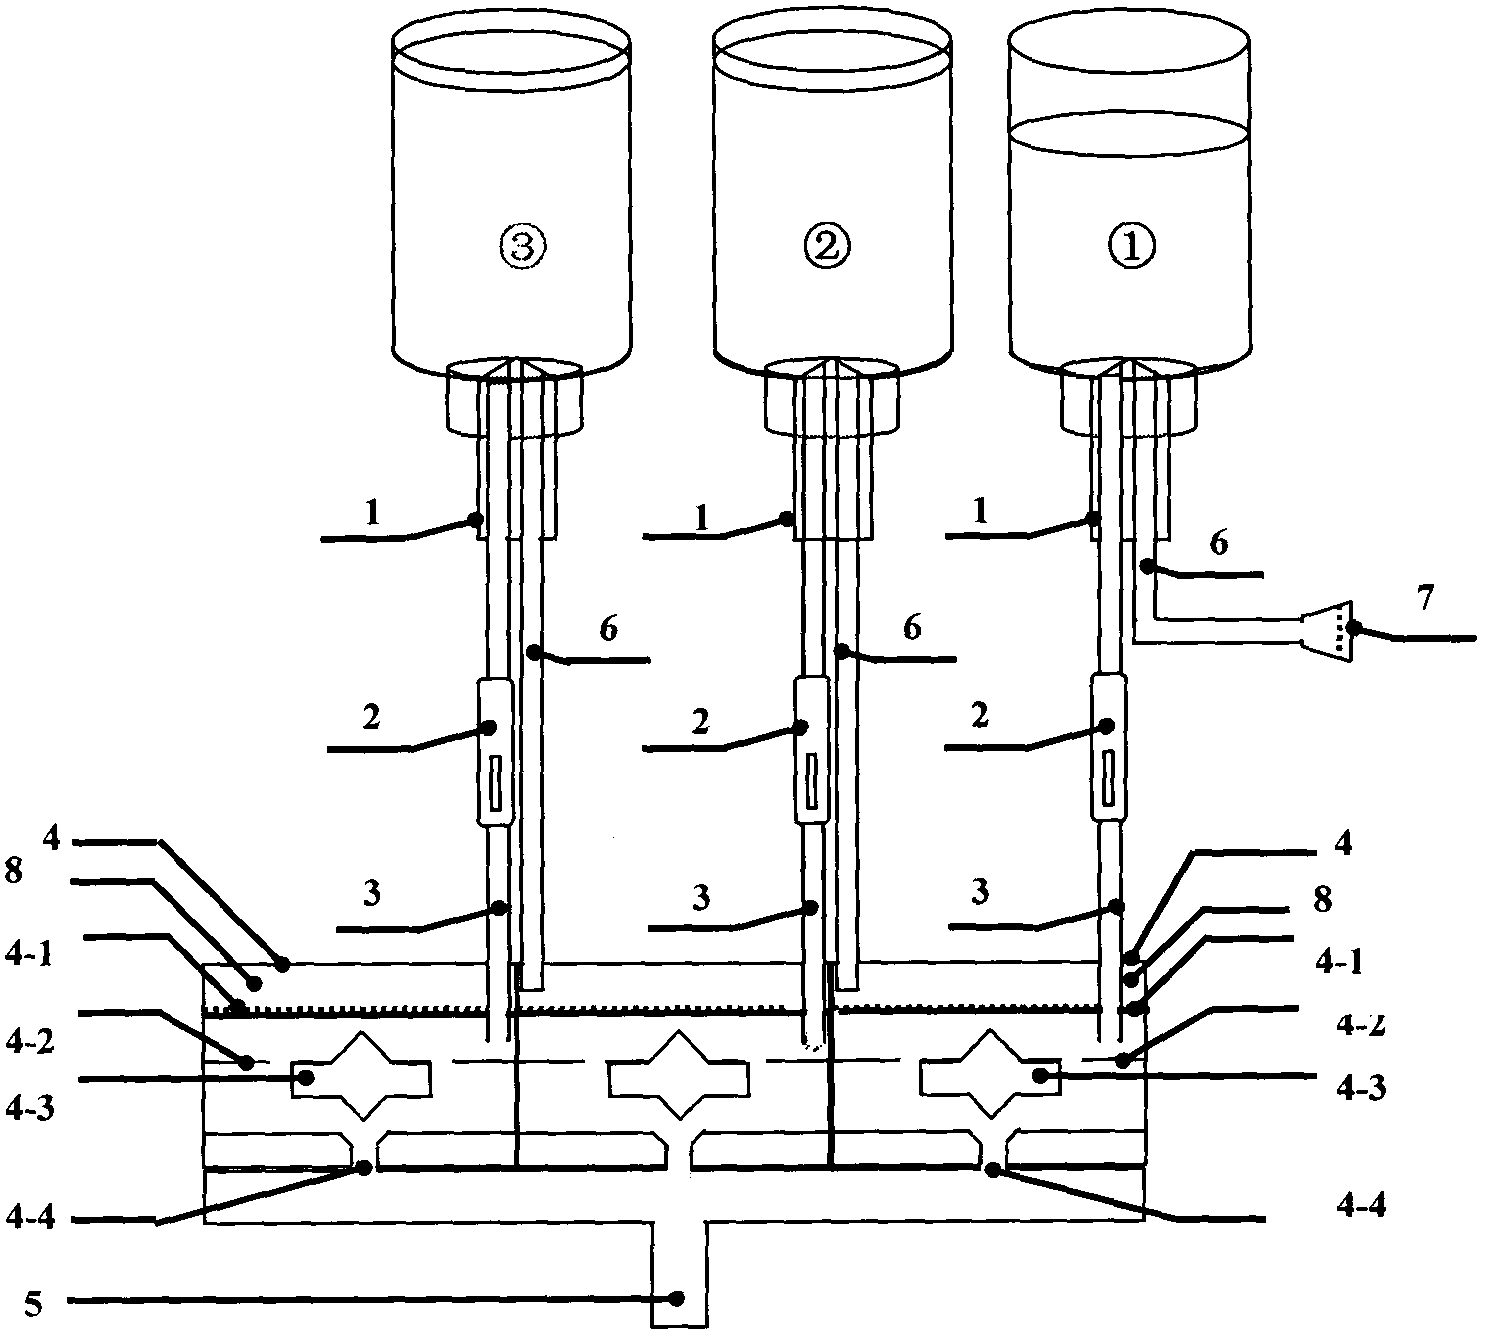 Transfusion device having automatic bottle change and safety protection functions